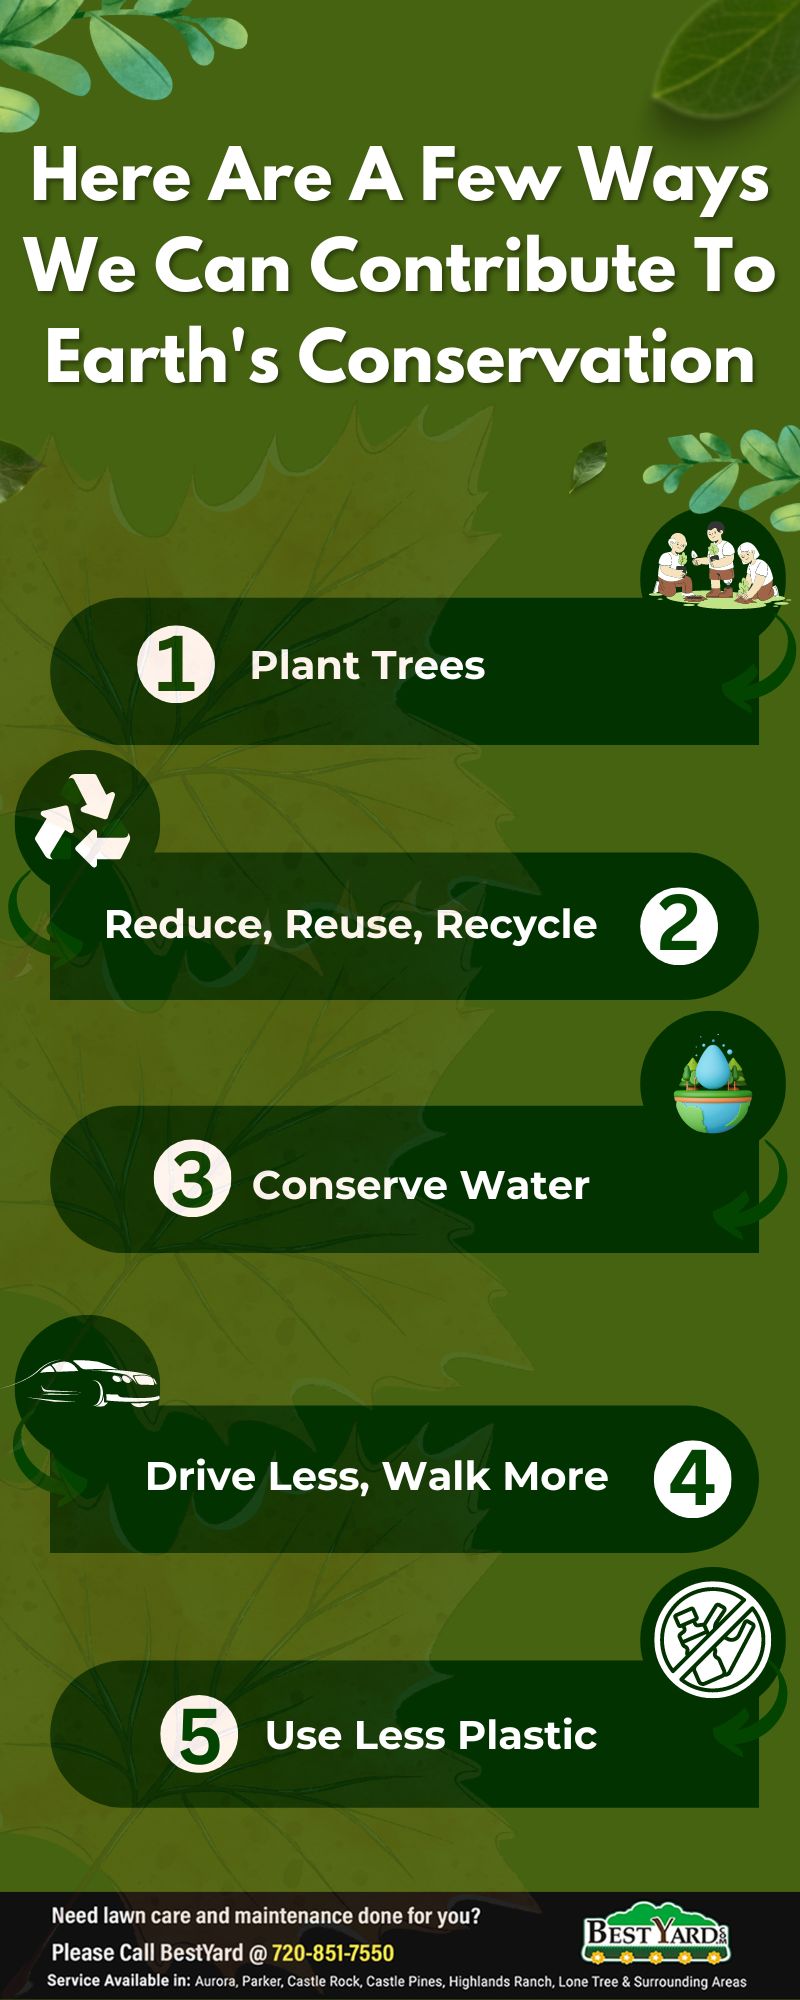 Few ways we can contribute to Earth's conservation